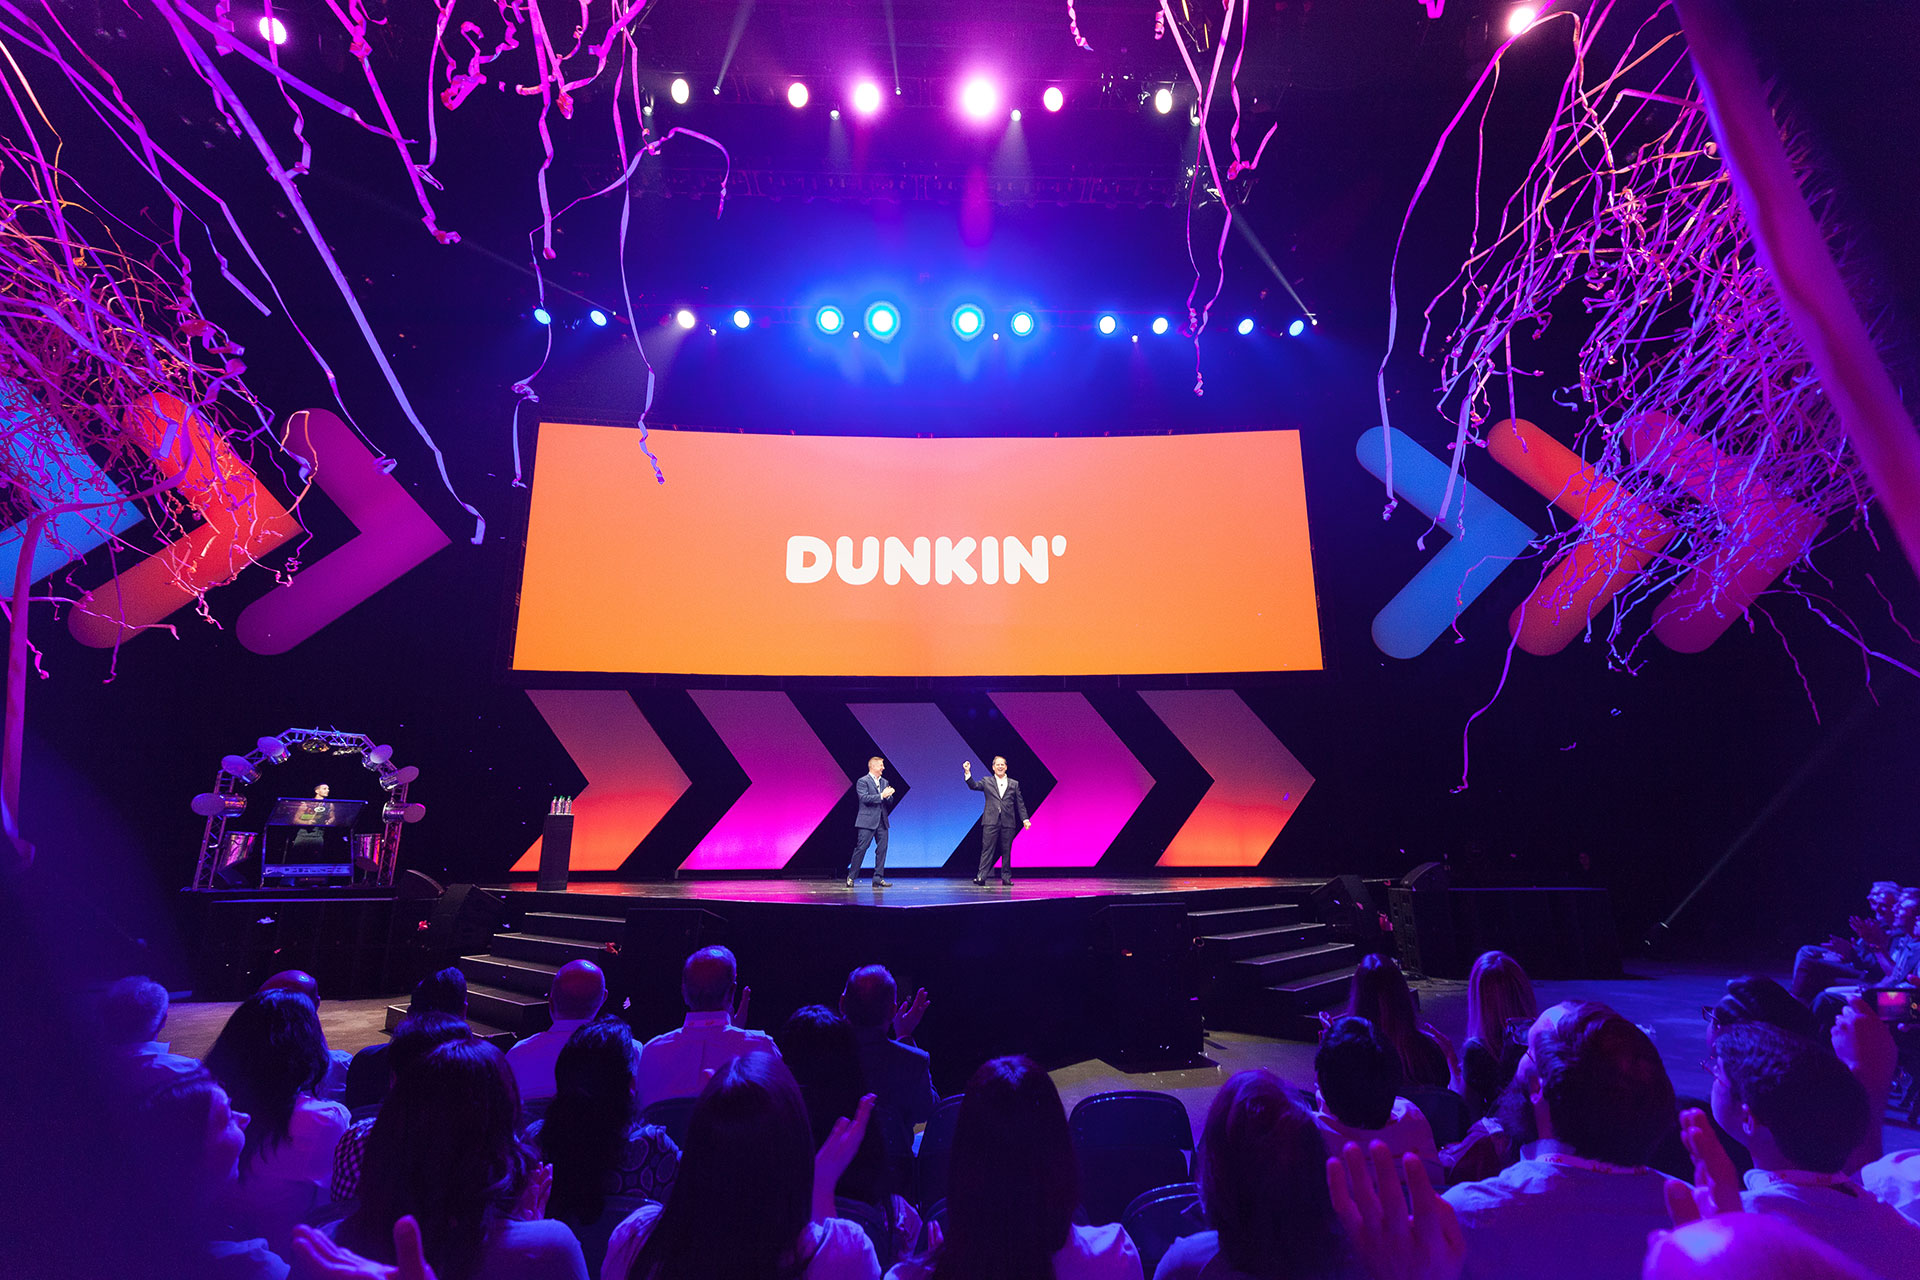 Two men in suits on an arena stage before an audience with blue and purple stage light and confetti flying in from the egdes of the frame and an orange screen with the words DUNKIN' in white in the back.